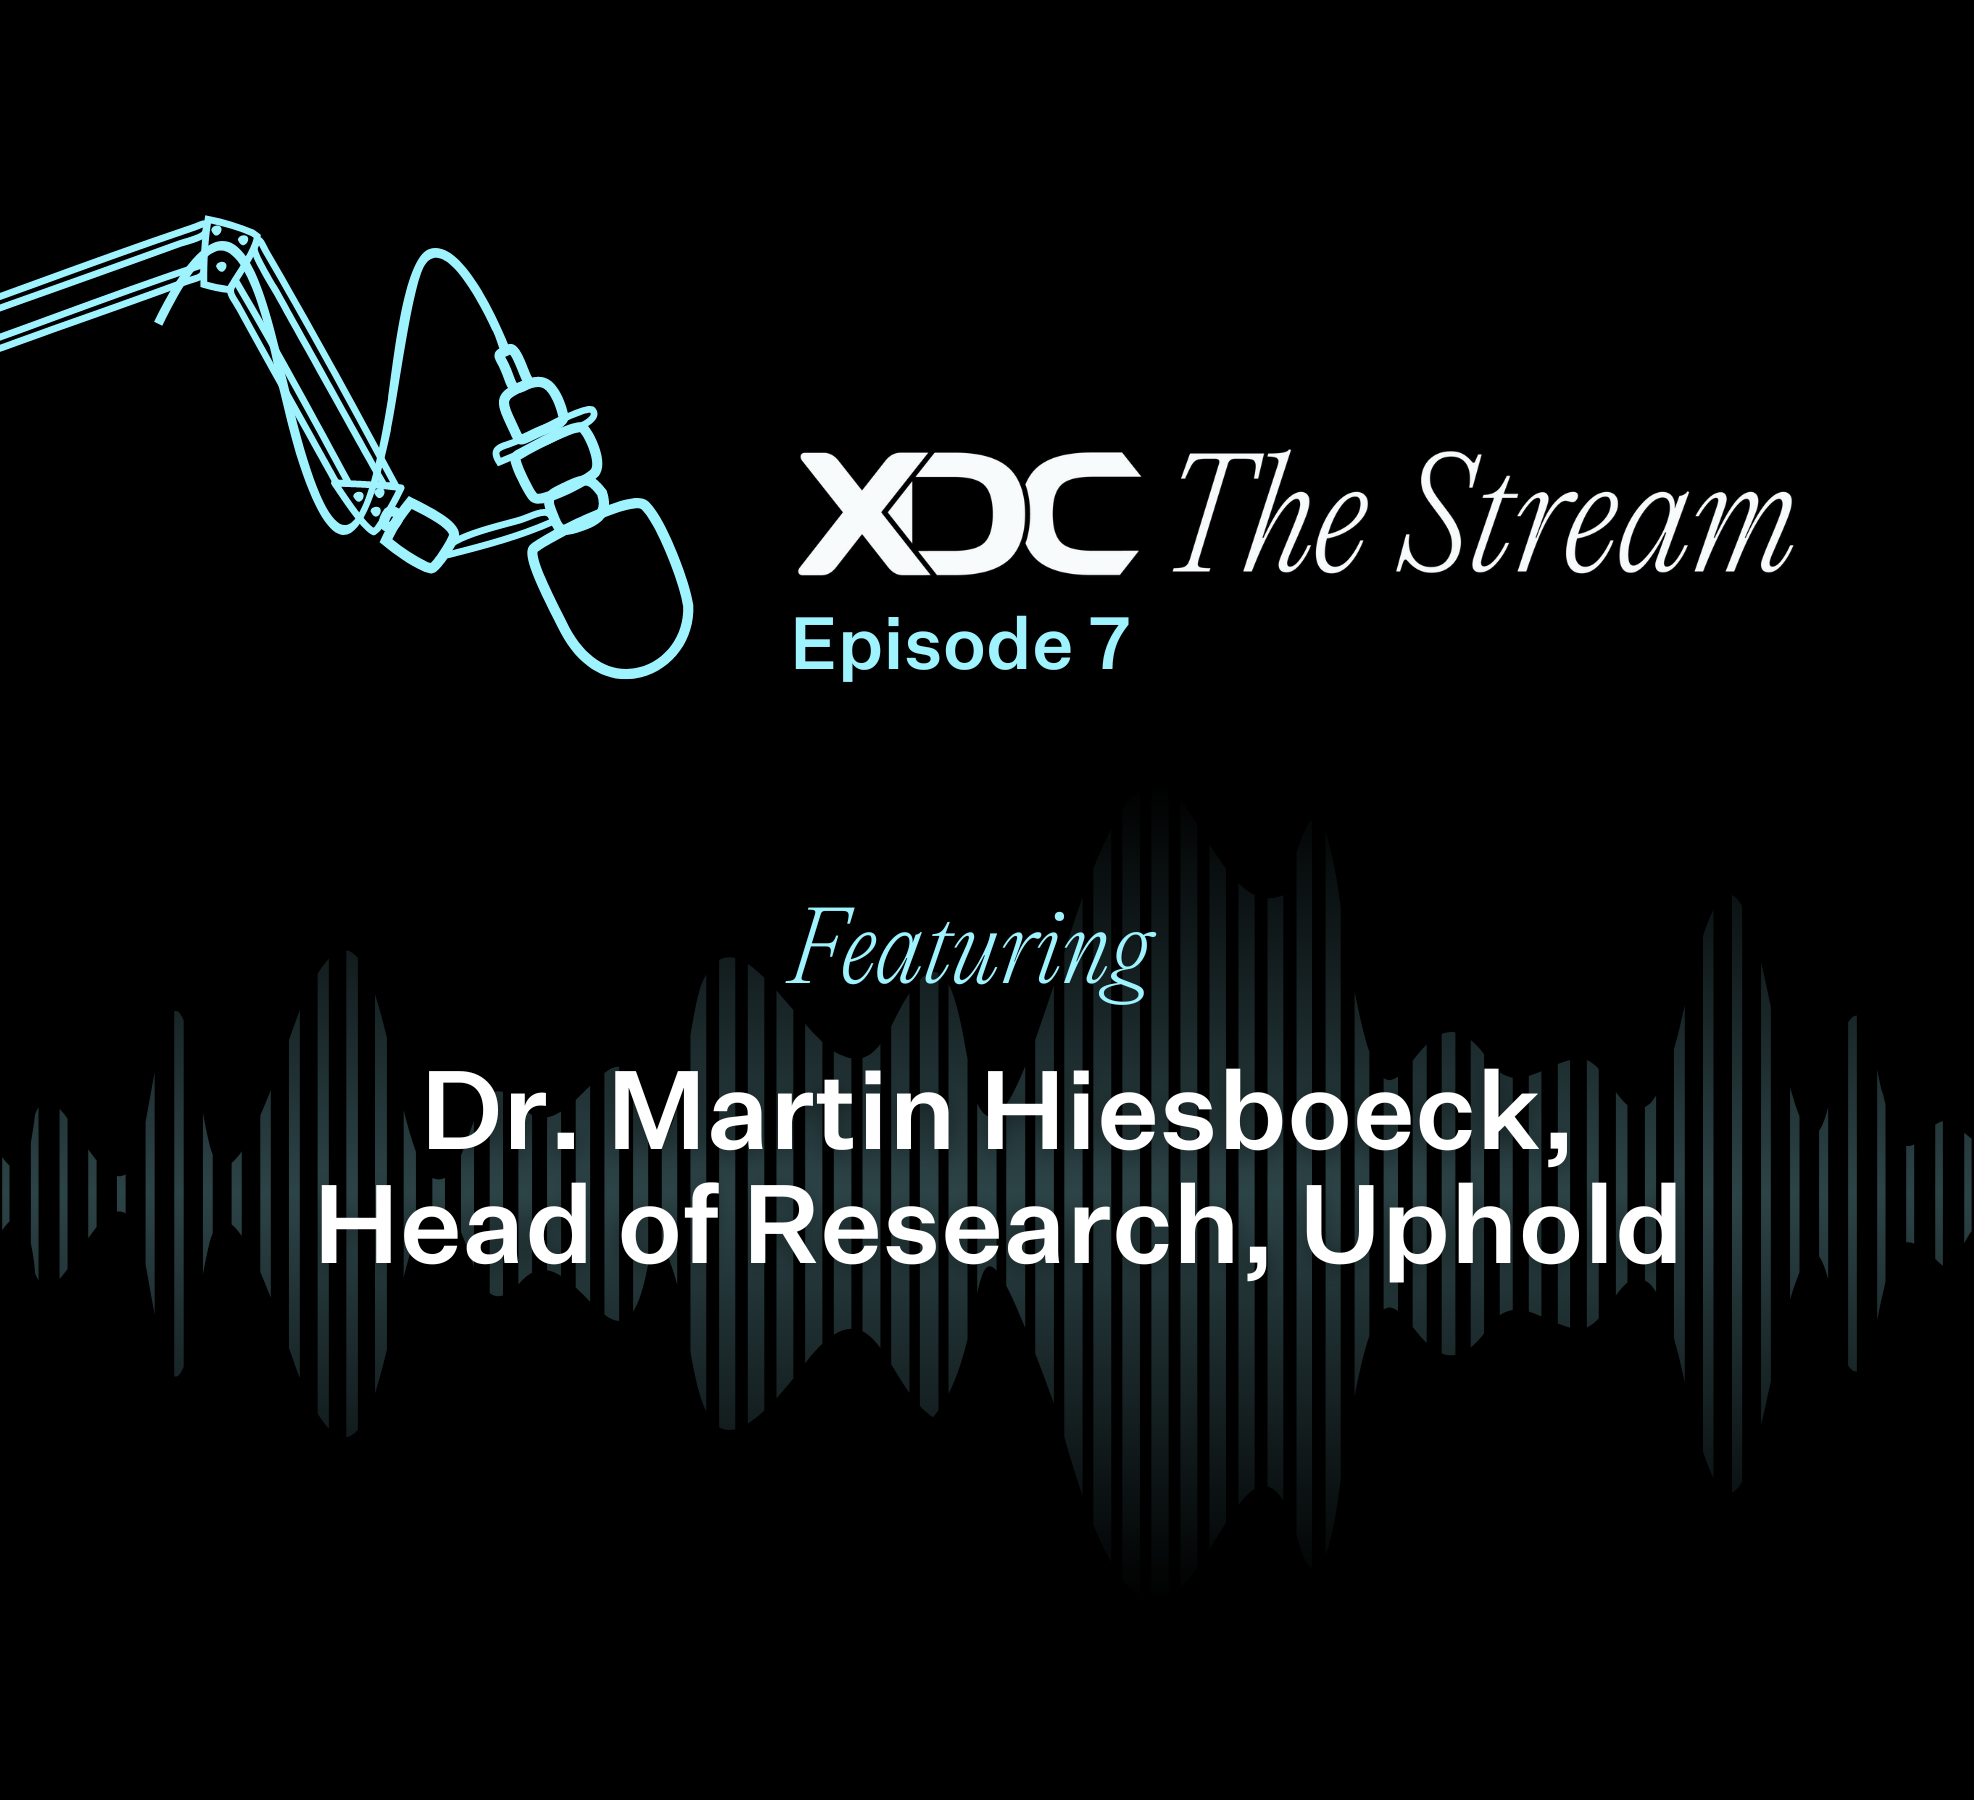 XDC The Stream Podcast Episode 7 - Hiesboeck